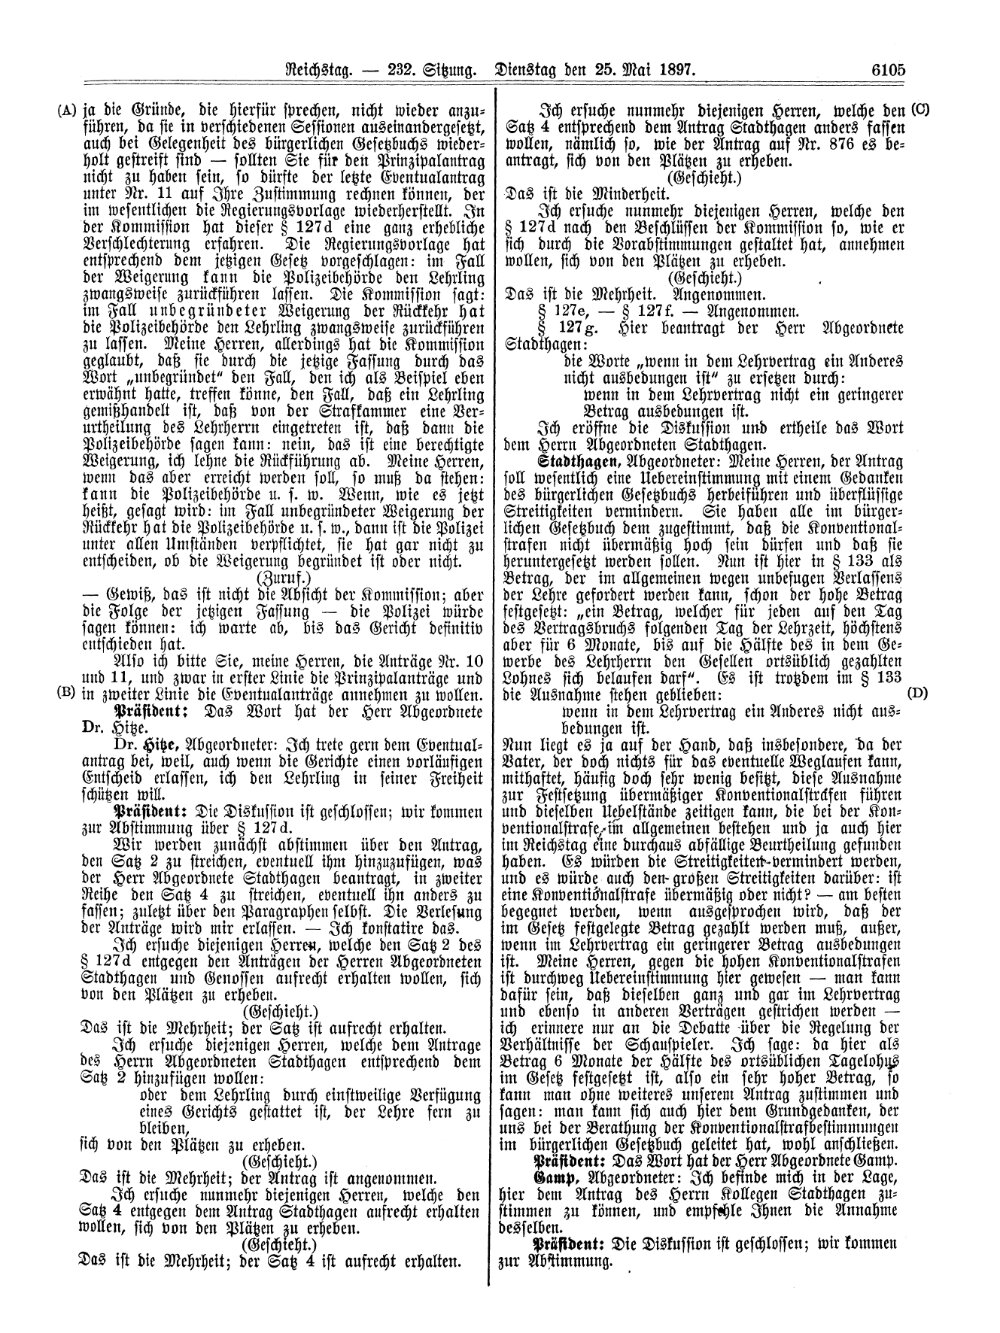 Scan of page 6105